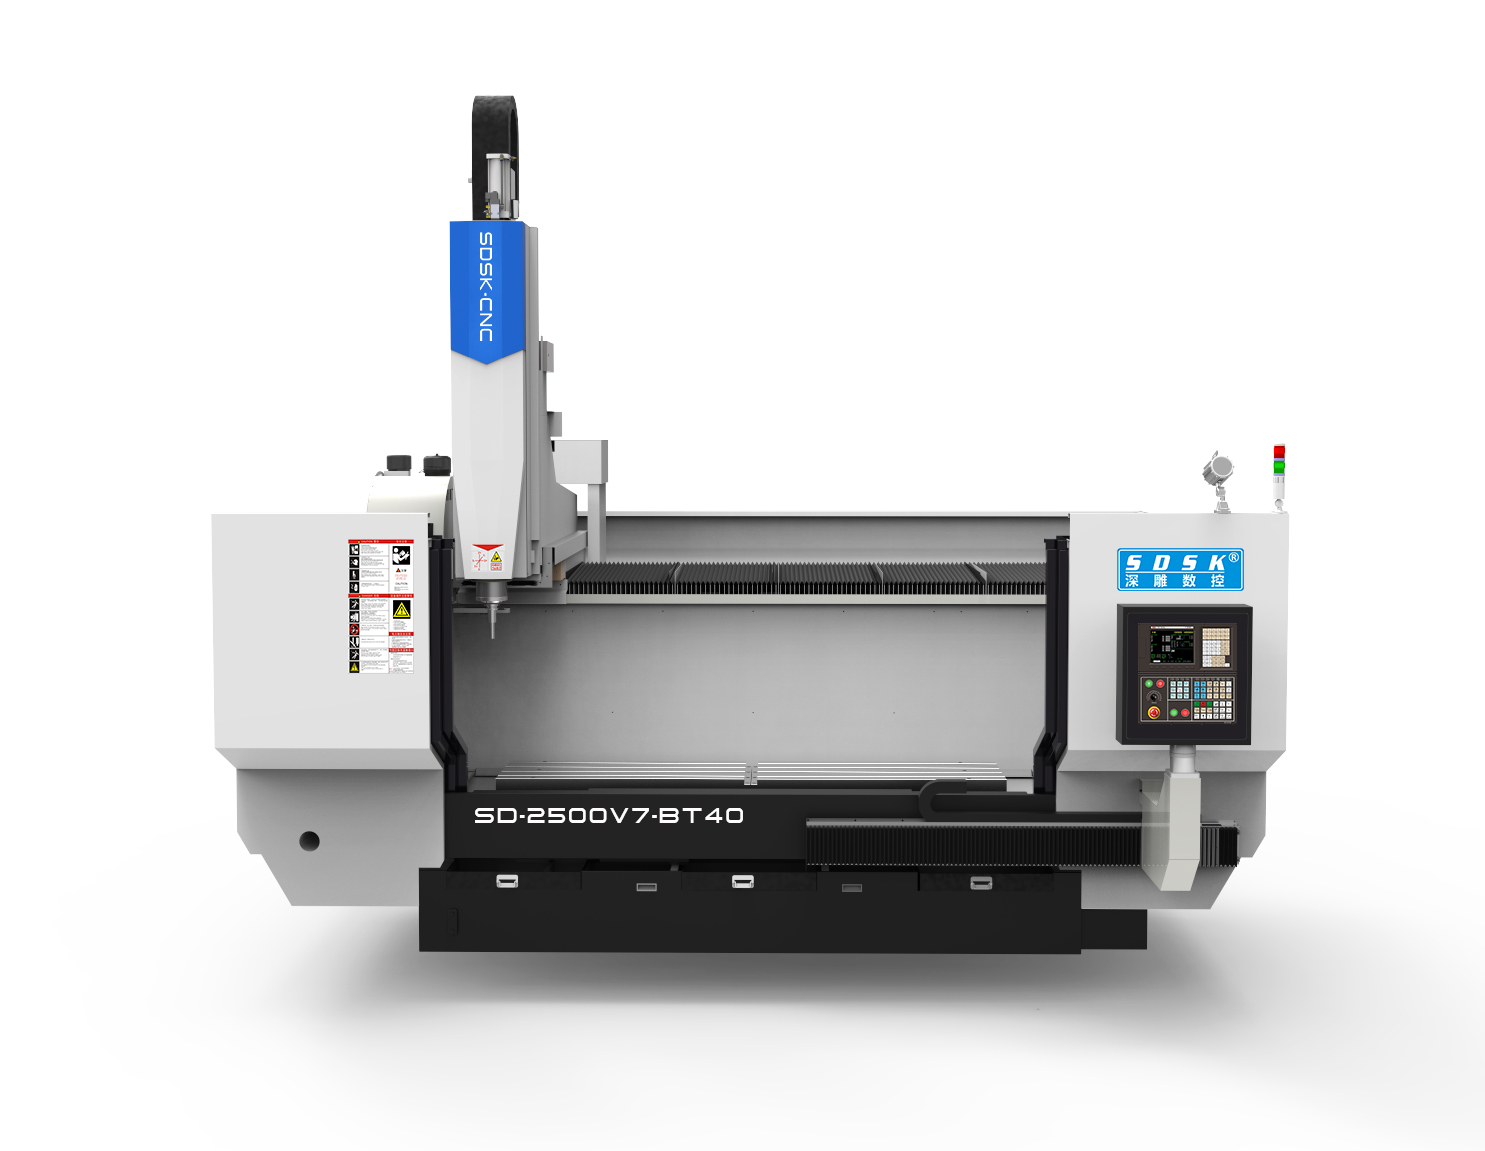 The CNC machine tool SD2500V7-BT40 is a customized large-scale profile machining center